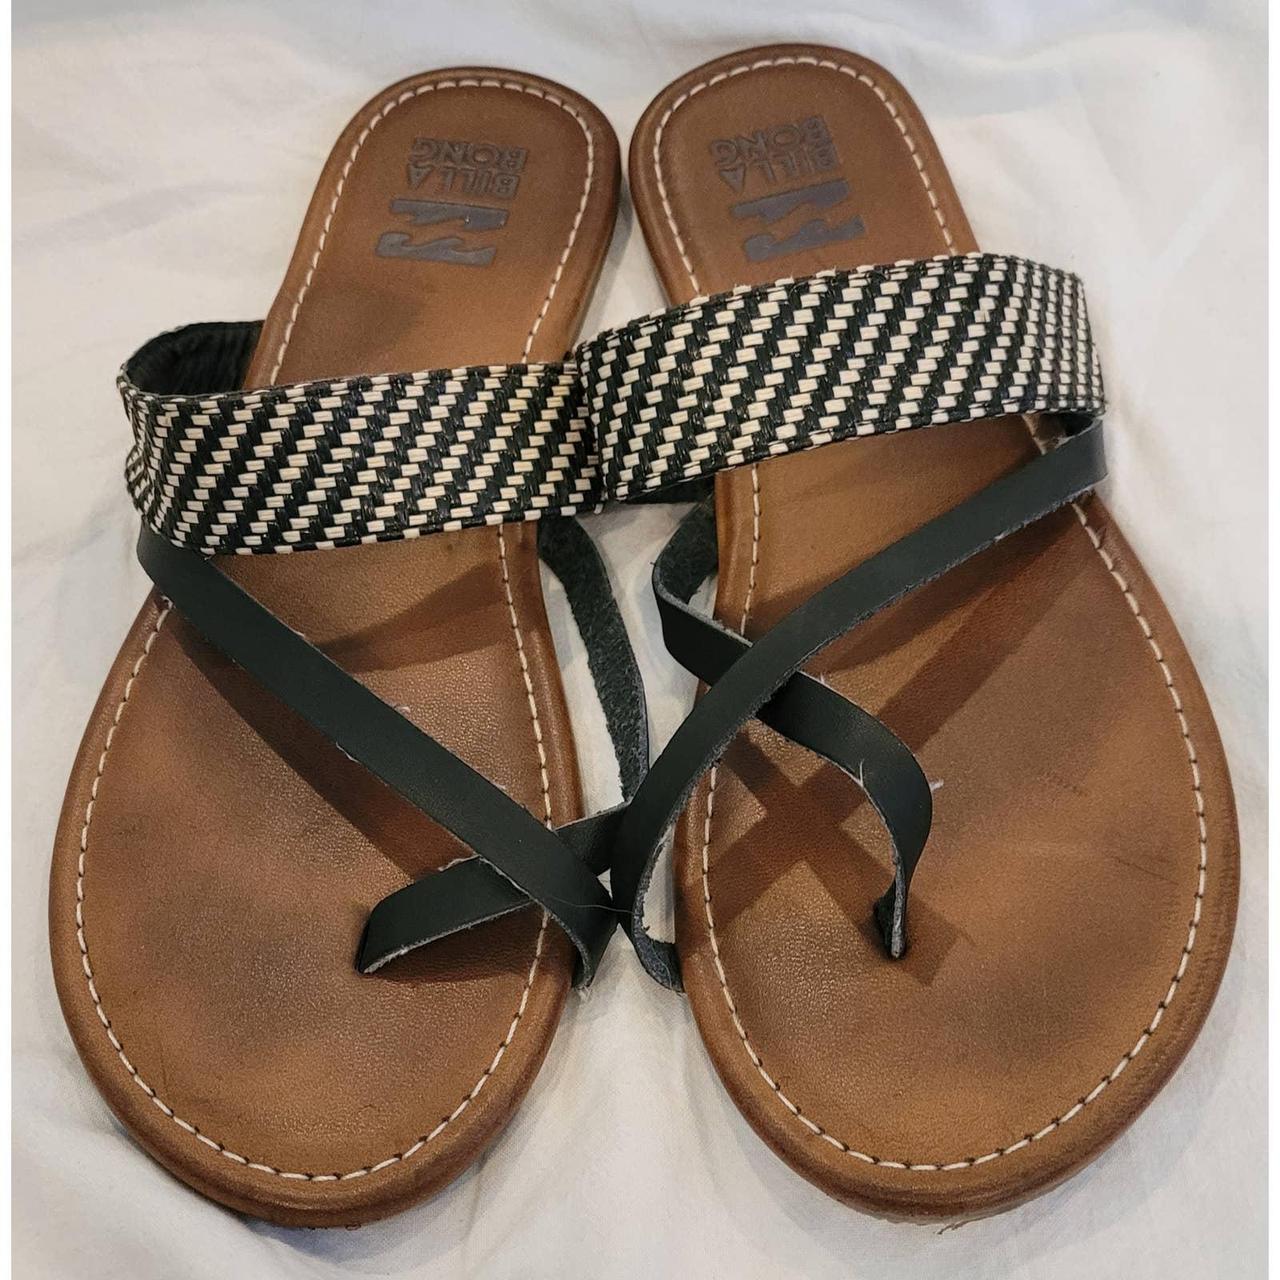 No size on these Sandals, but the billabong size... - Depop